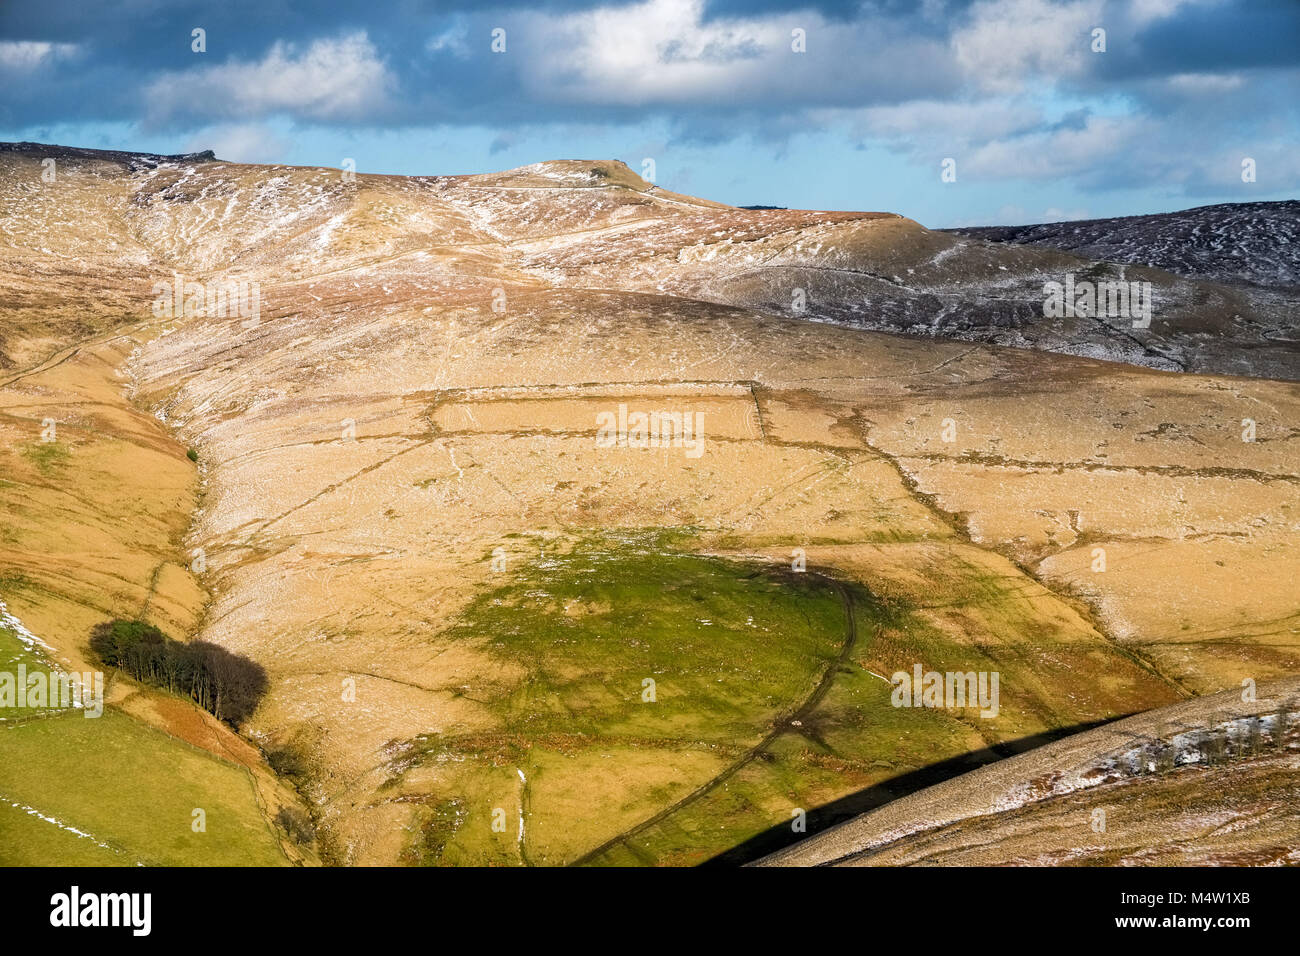 Looking from South Head towards Edale Rocks, Swine's Back, Edale Cross. Kinder Scout, Peak District National Park. Winter Stock Photo